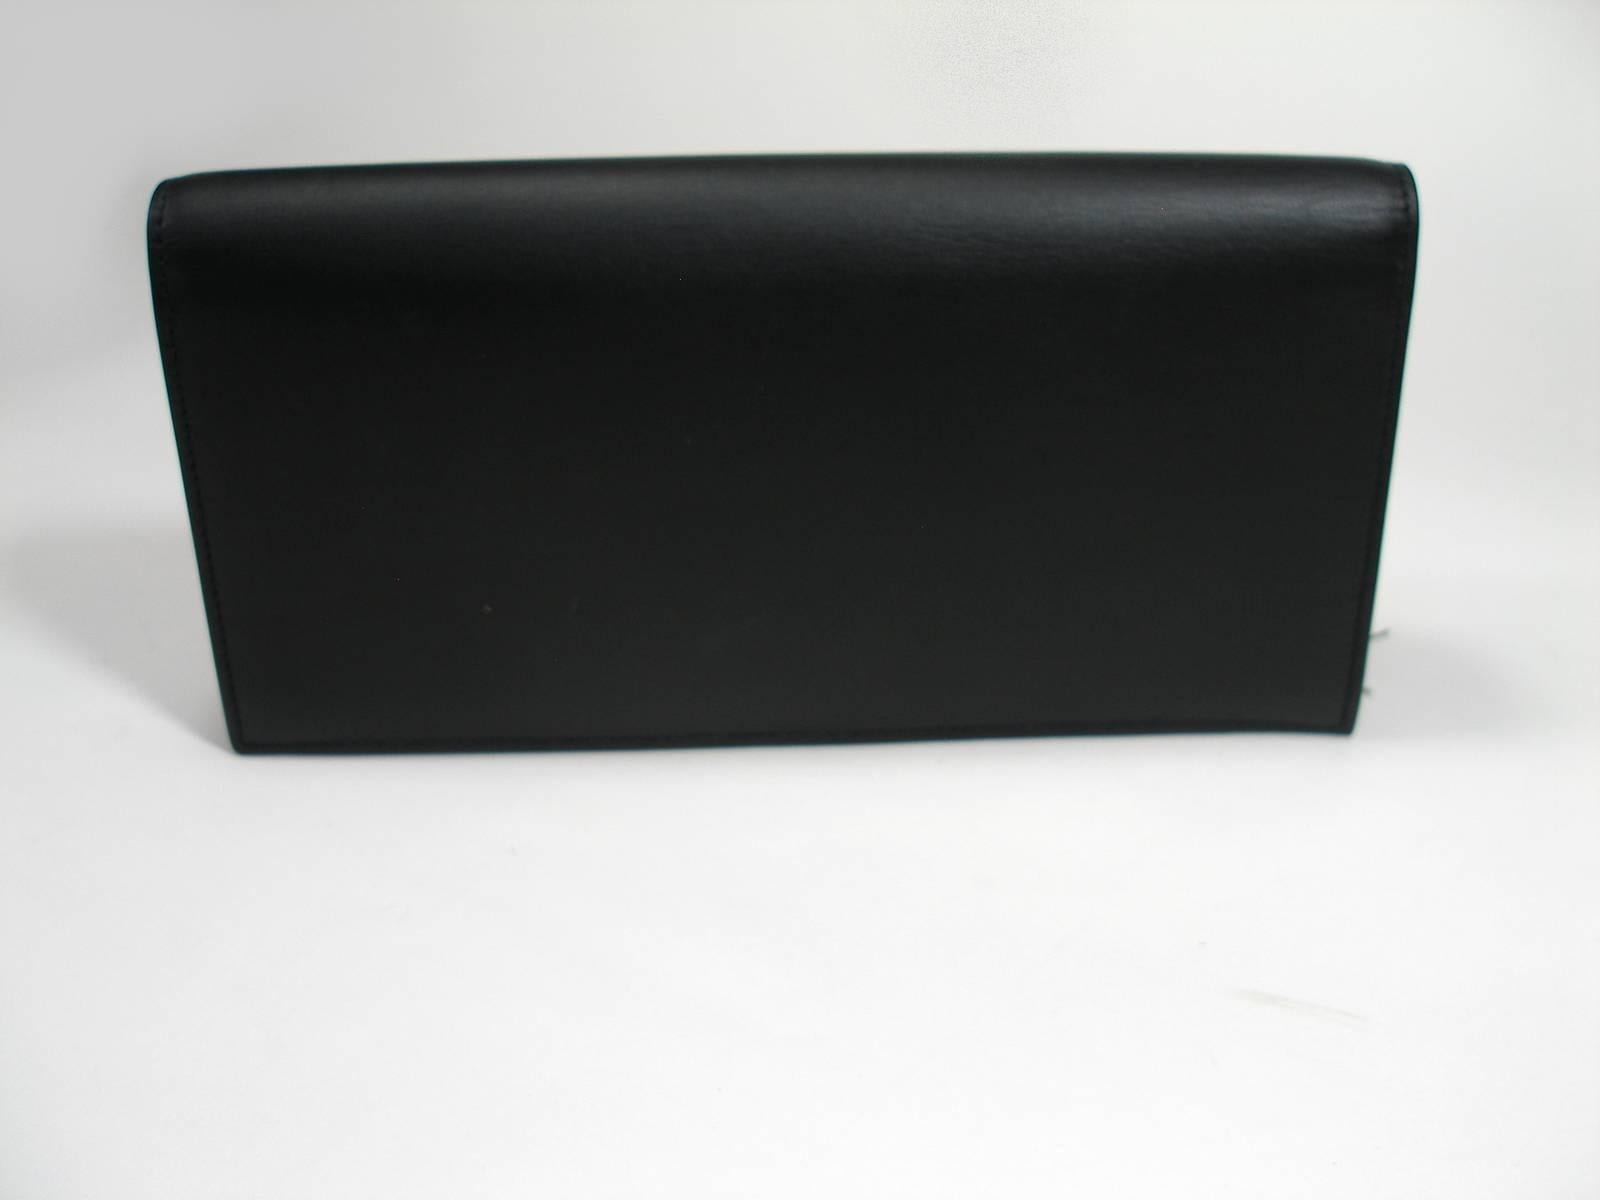 Yves Saint Laurent Le Sept Fringed Pouch in black leather / SOLD OUT in shop YSL For Sale 3